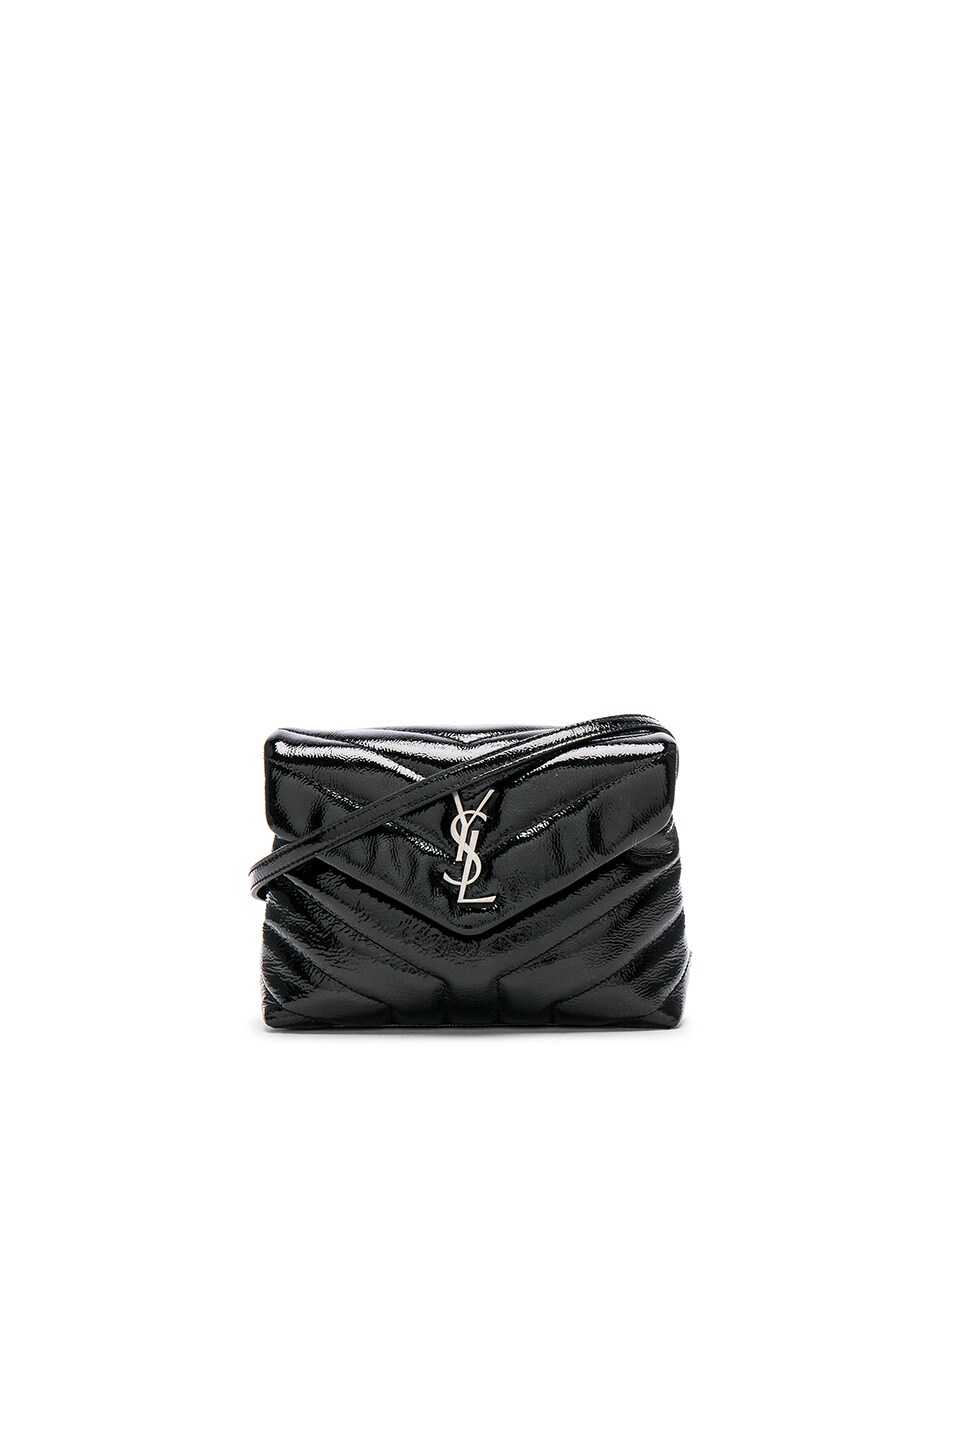 Image 1 of Saint Laurent Toy Patent Loulou Monogramme Strap Bag in Black